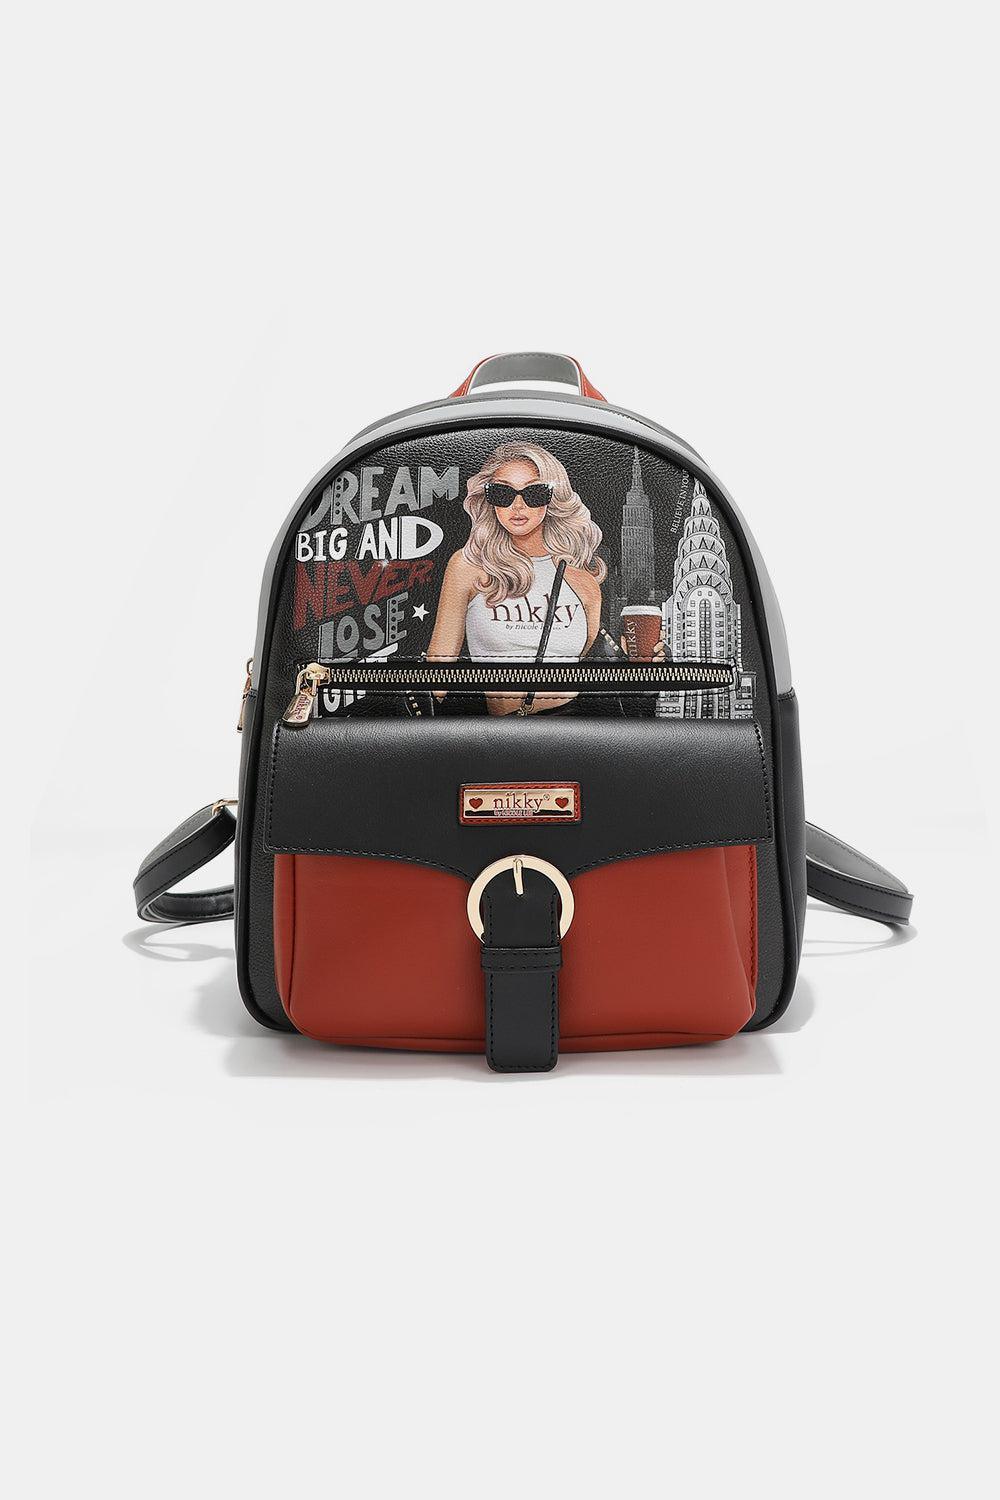 a black and red backpack with a picture of a woman on it